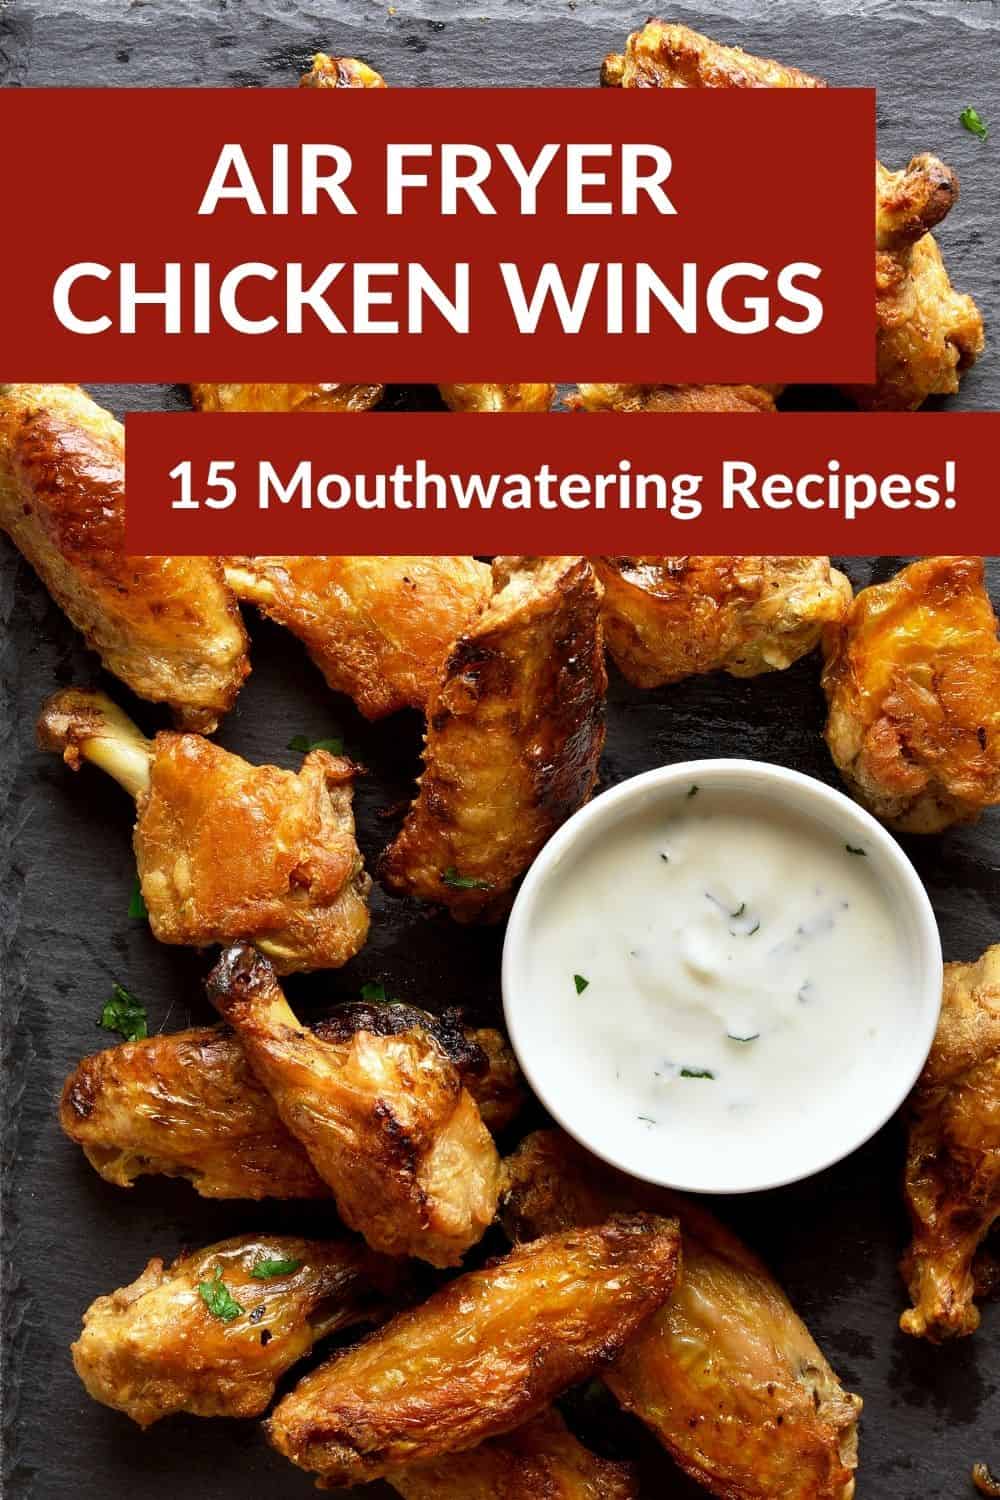 Air Fryer Chicken Wings - 15 Mouthwatering Recipes